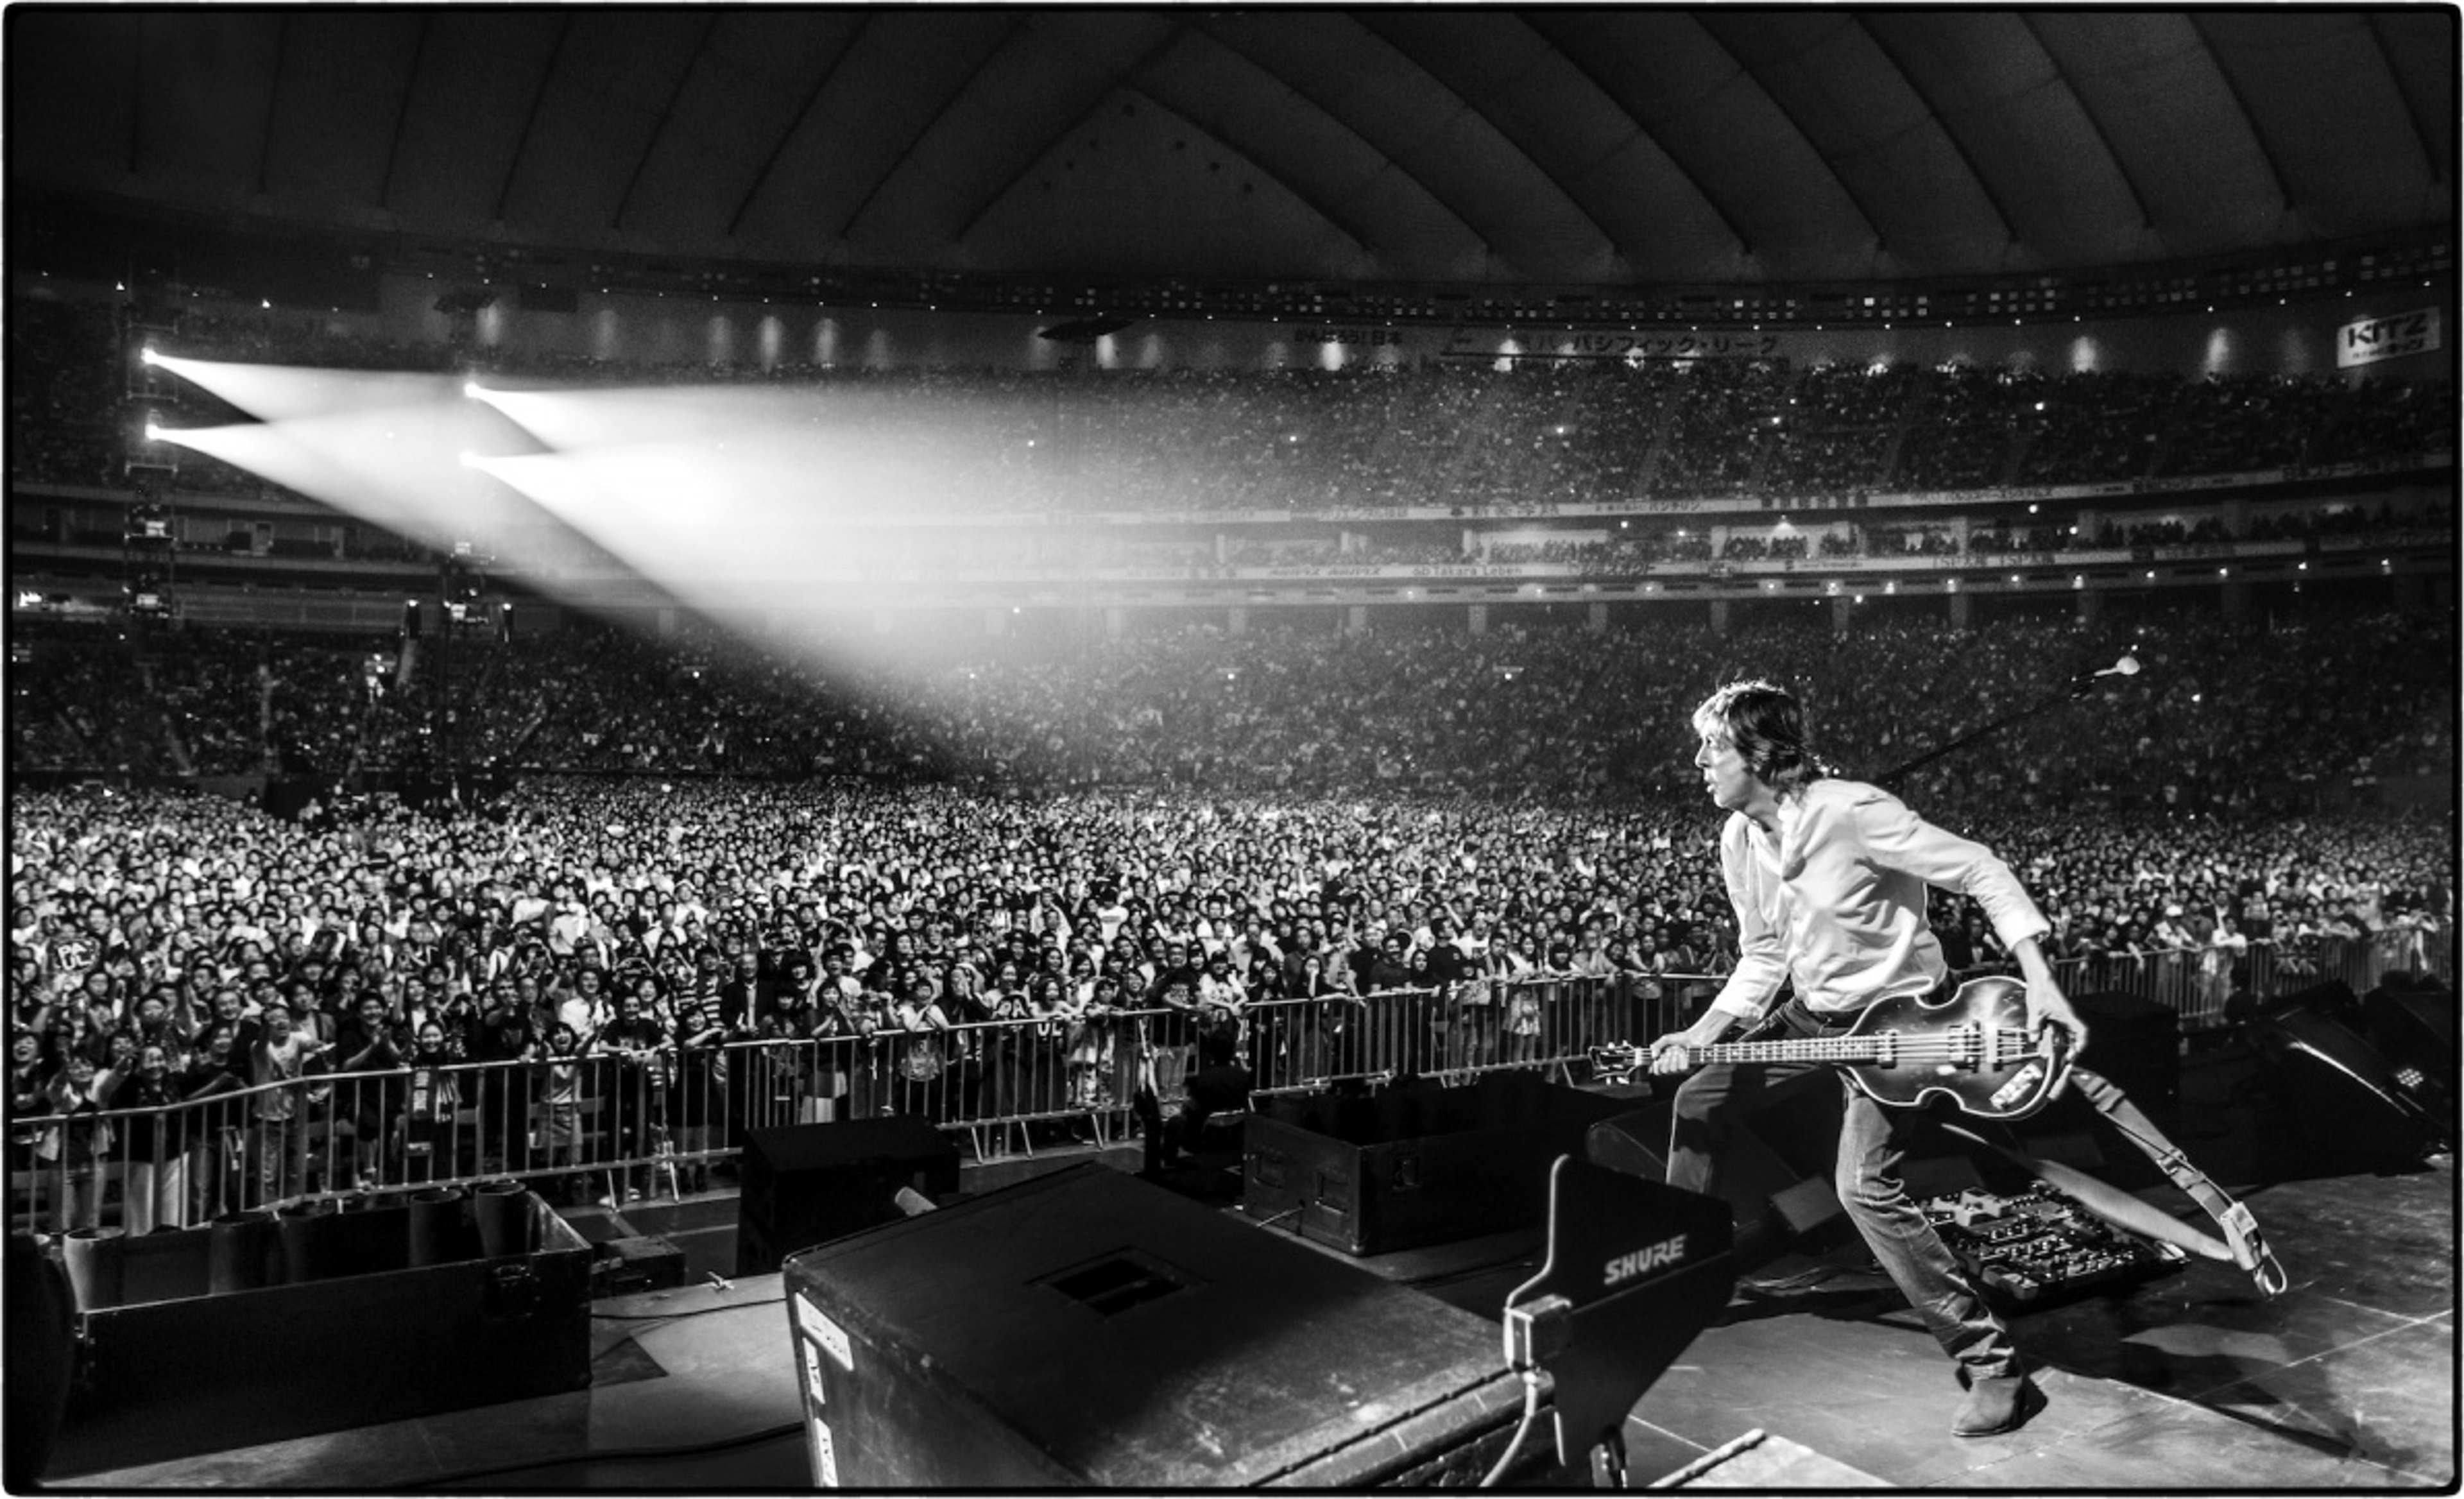 Paul and the crowd at the Tokyo Dome, 2017